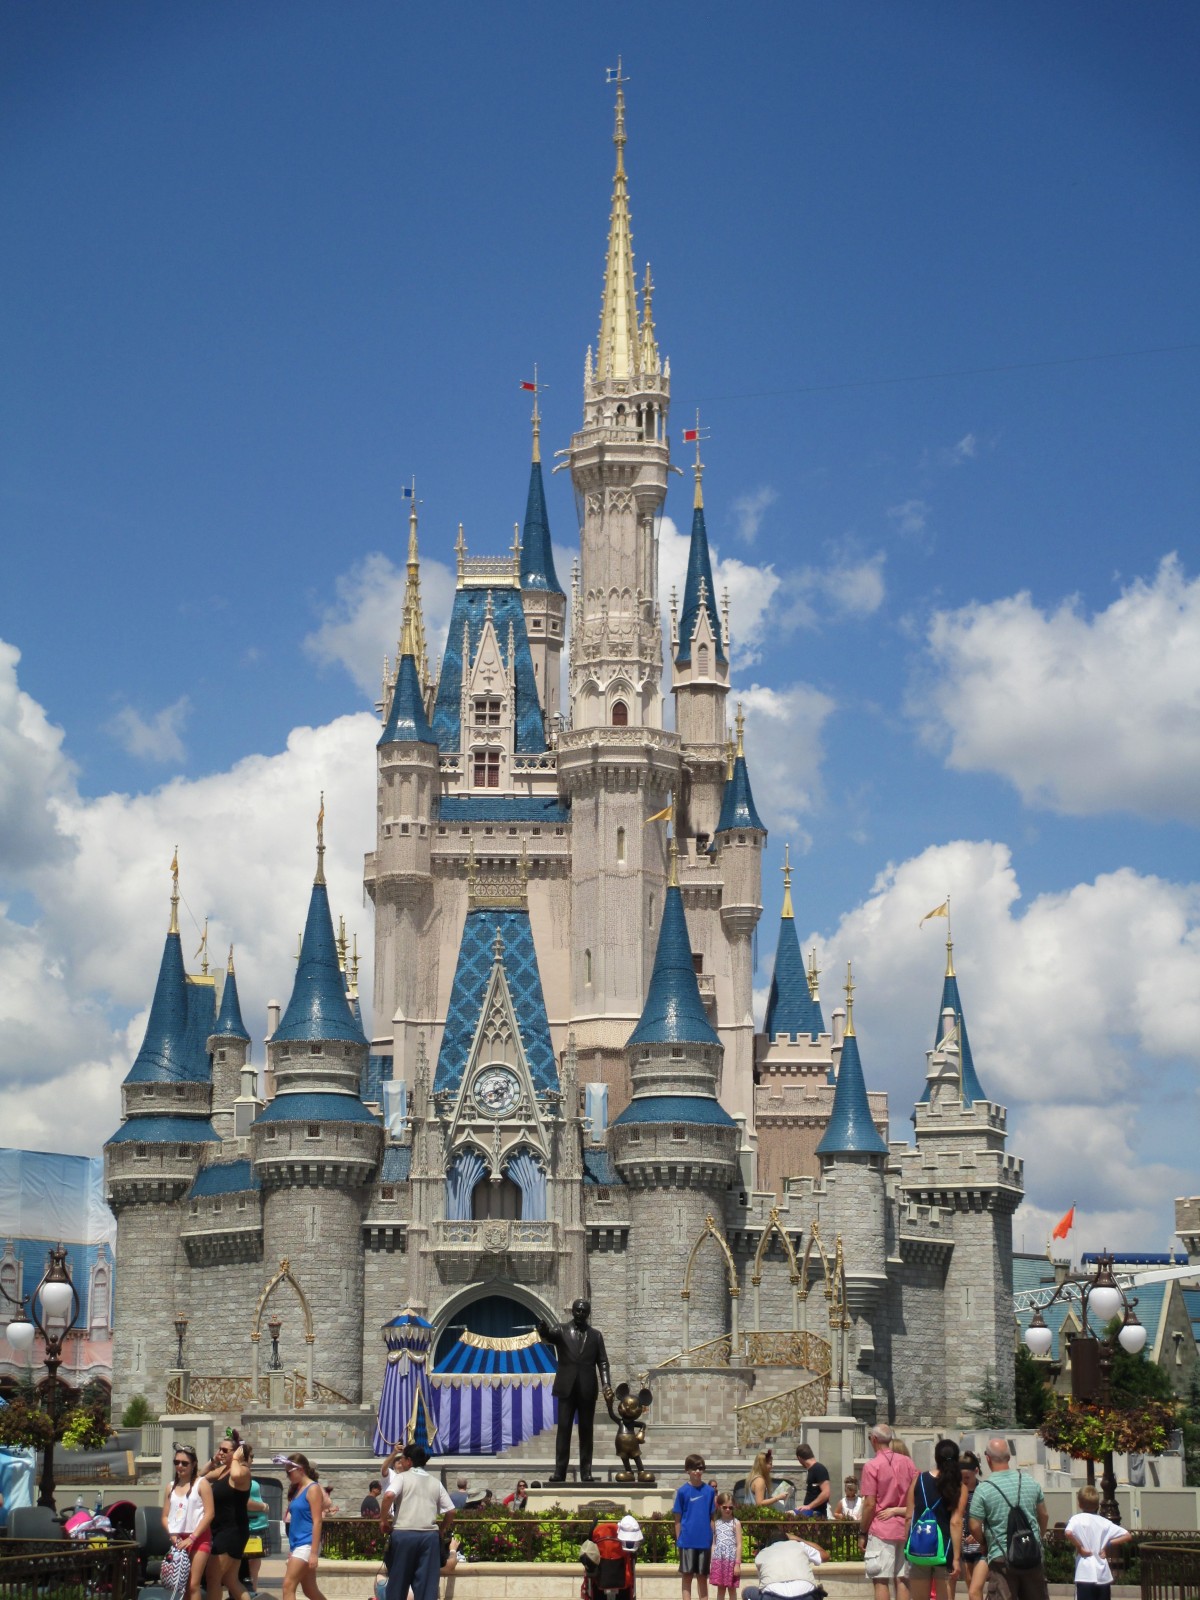 Getting Better Referrals for Your Dental Practice the Disney Way